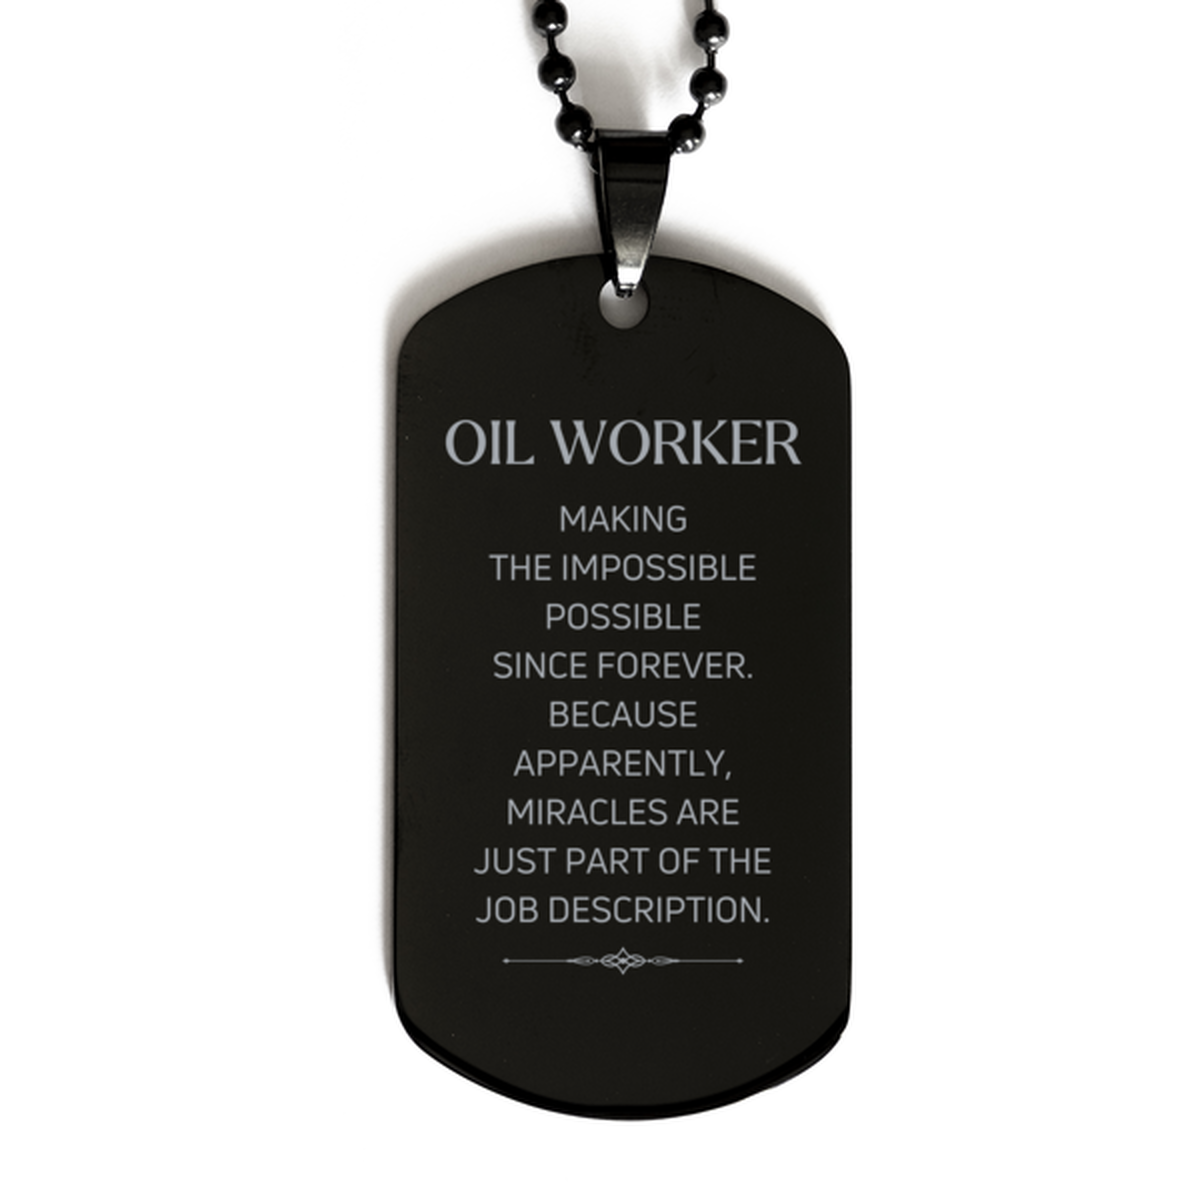 Funny Oil Worker Gifts, Miracles are just part of the job description, Inspirational Birthday Black Dog Tag For Oil Worker, Men, Women, Coworkers, Friends, Boss